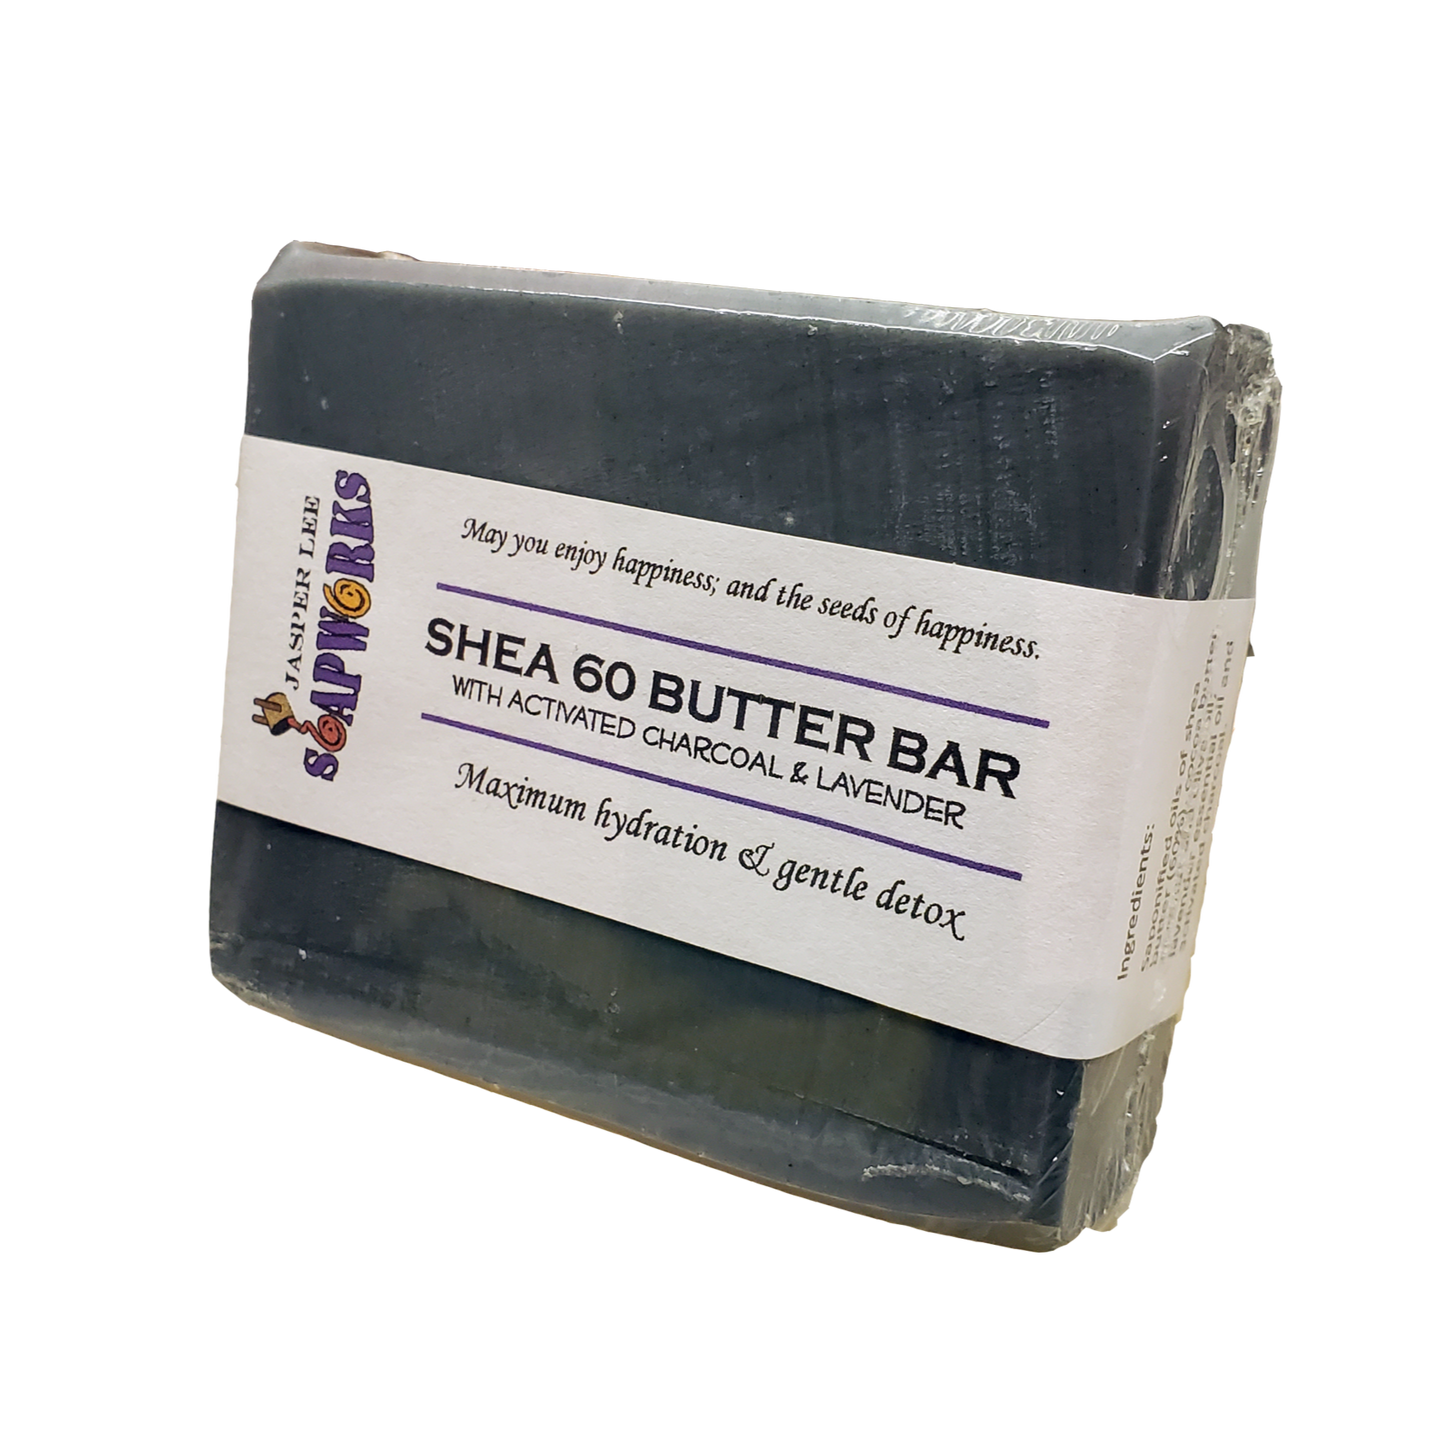 Large rectangular bar of Shea 60 Butter Bar soap with activated charcoal 